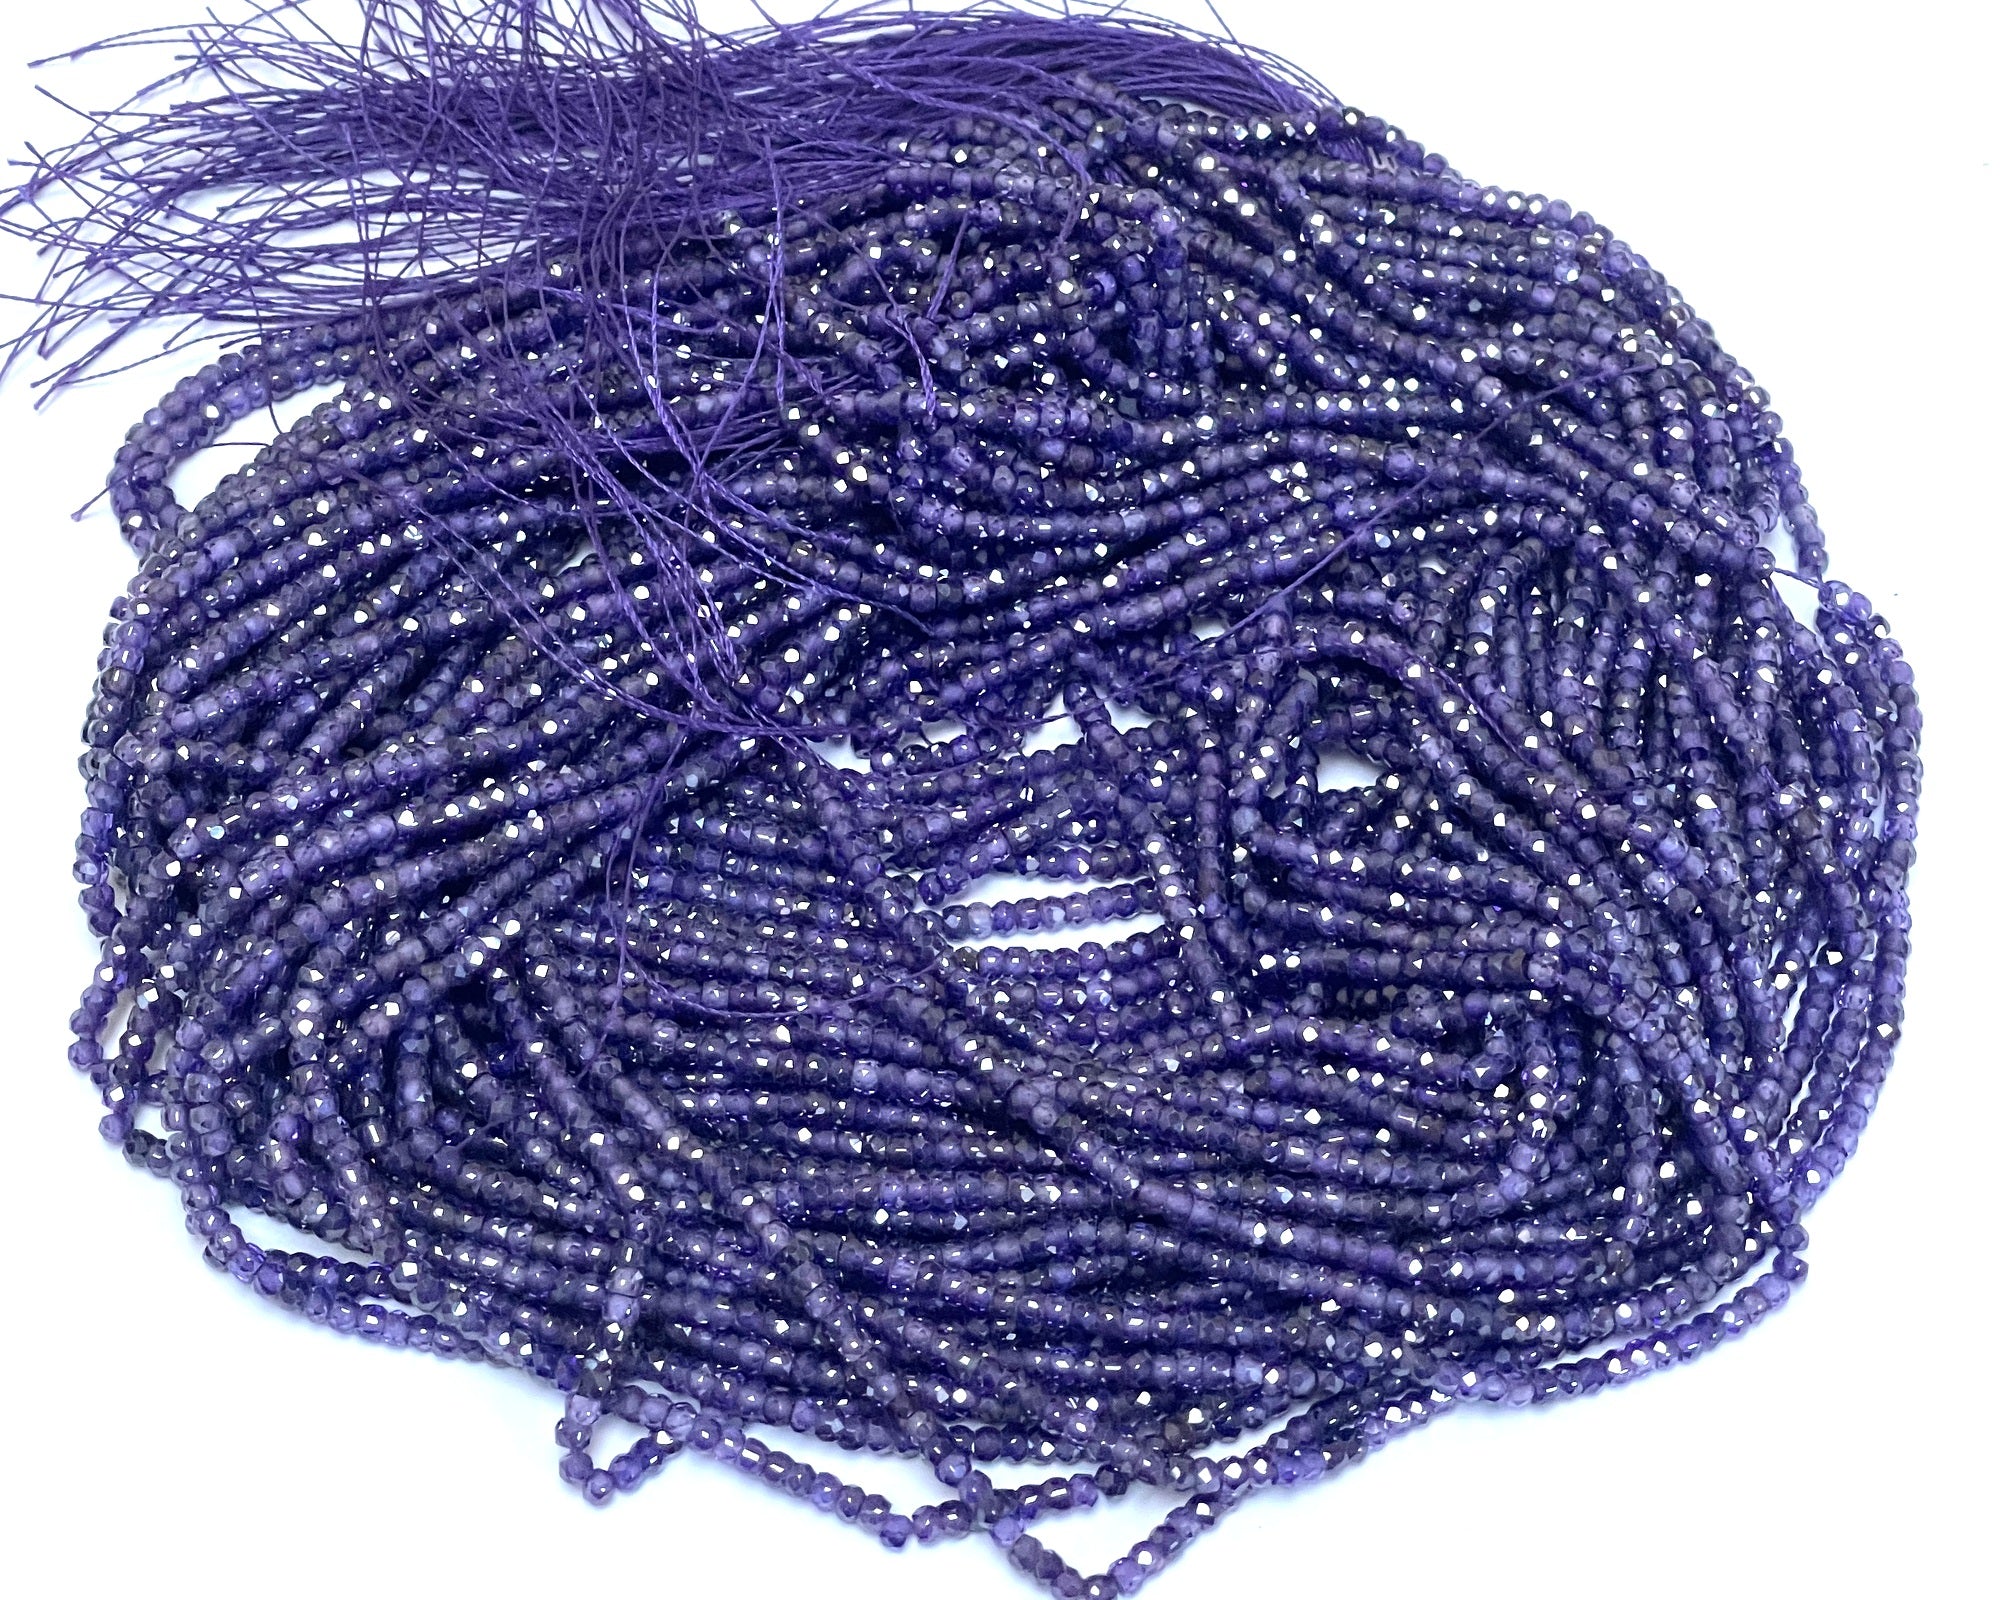 Purple Zircon 3x2mm rondelle micro faceted sparkling CZ beads 15" strand